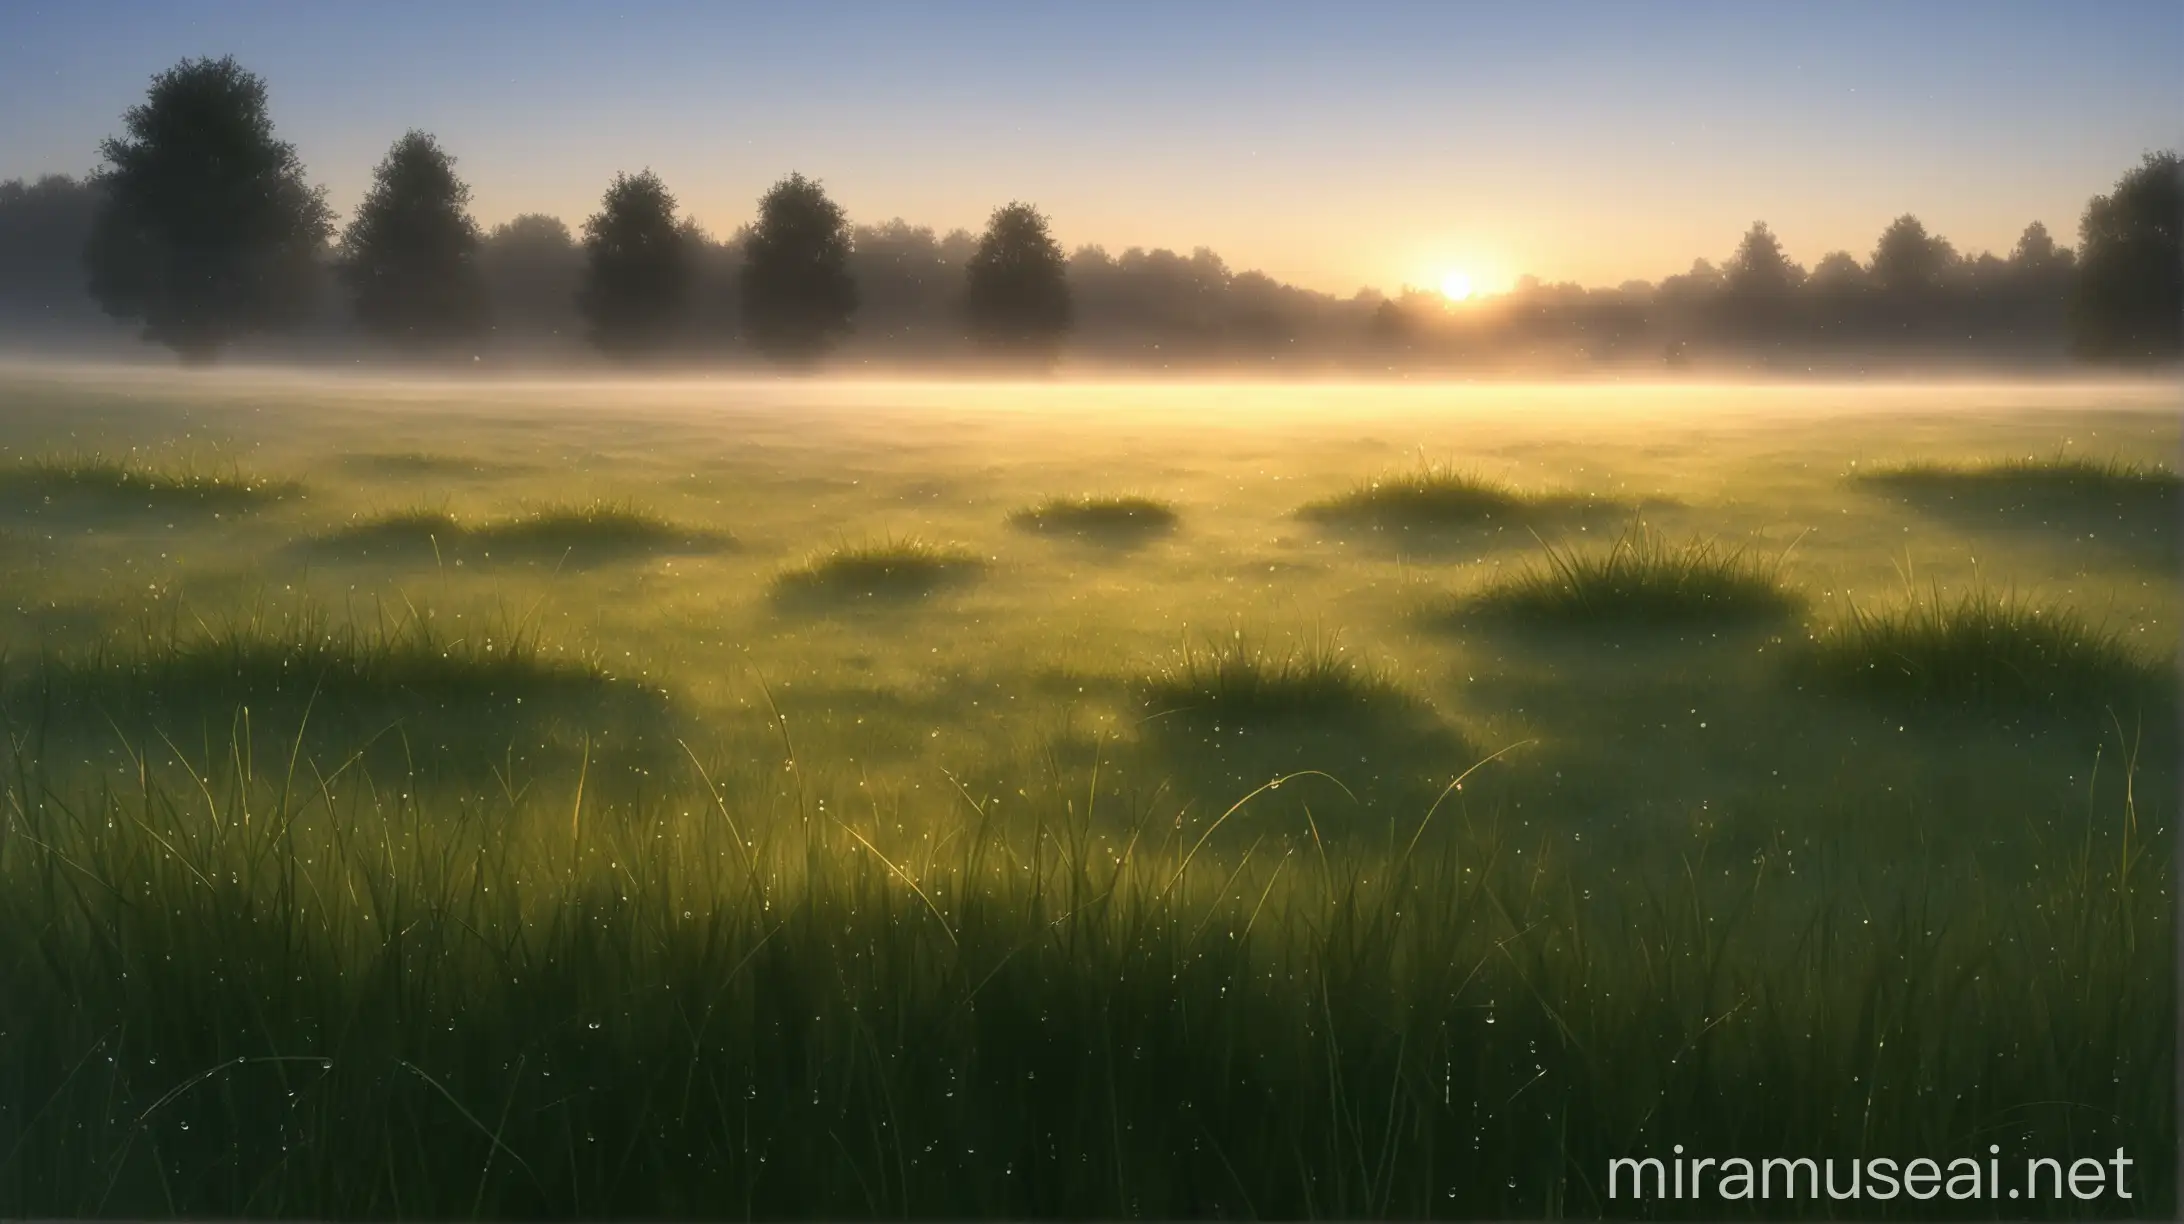 A peaceful meadow at dawn, with soft light illuminating dew on the grass.